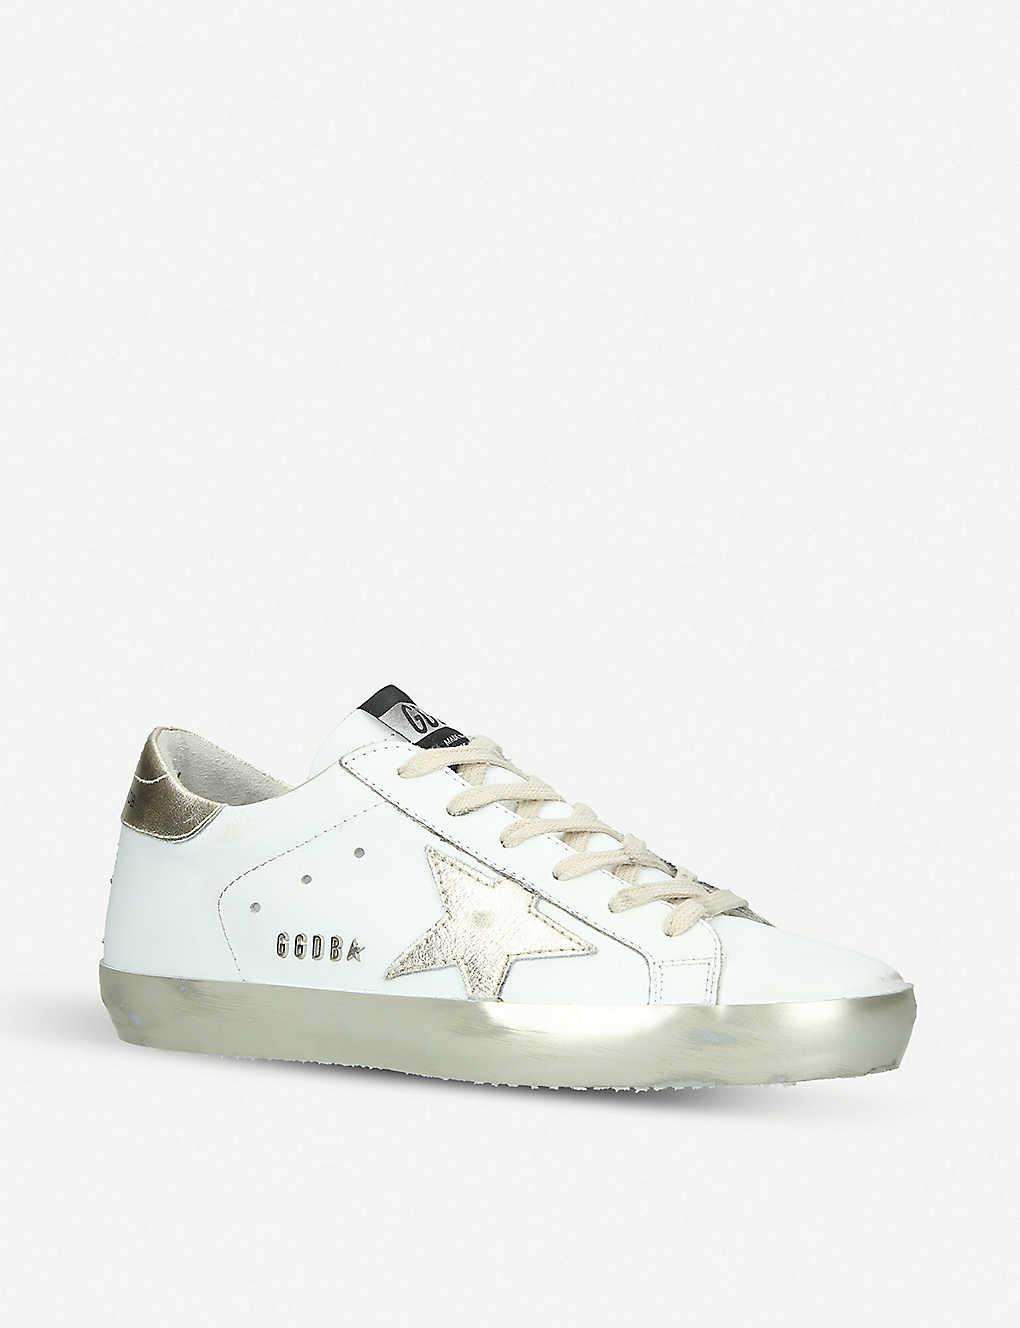 golden goose superstar e37 sparkle leather trainers